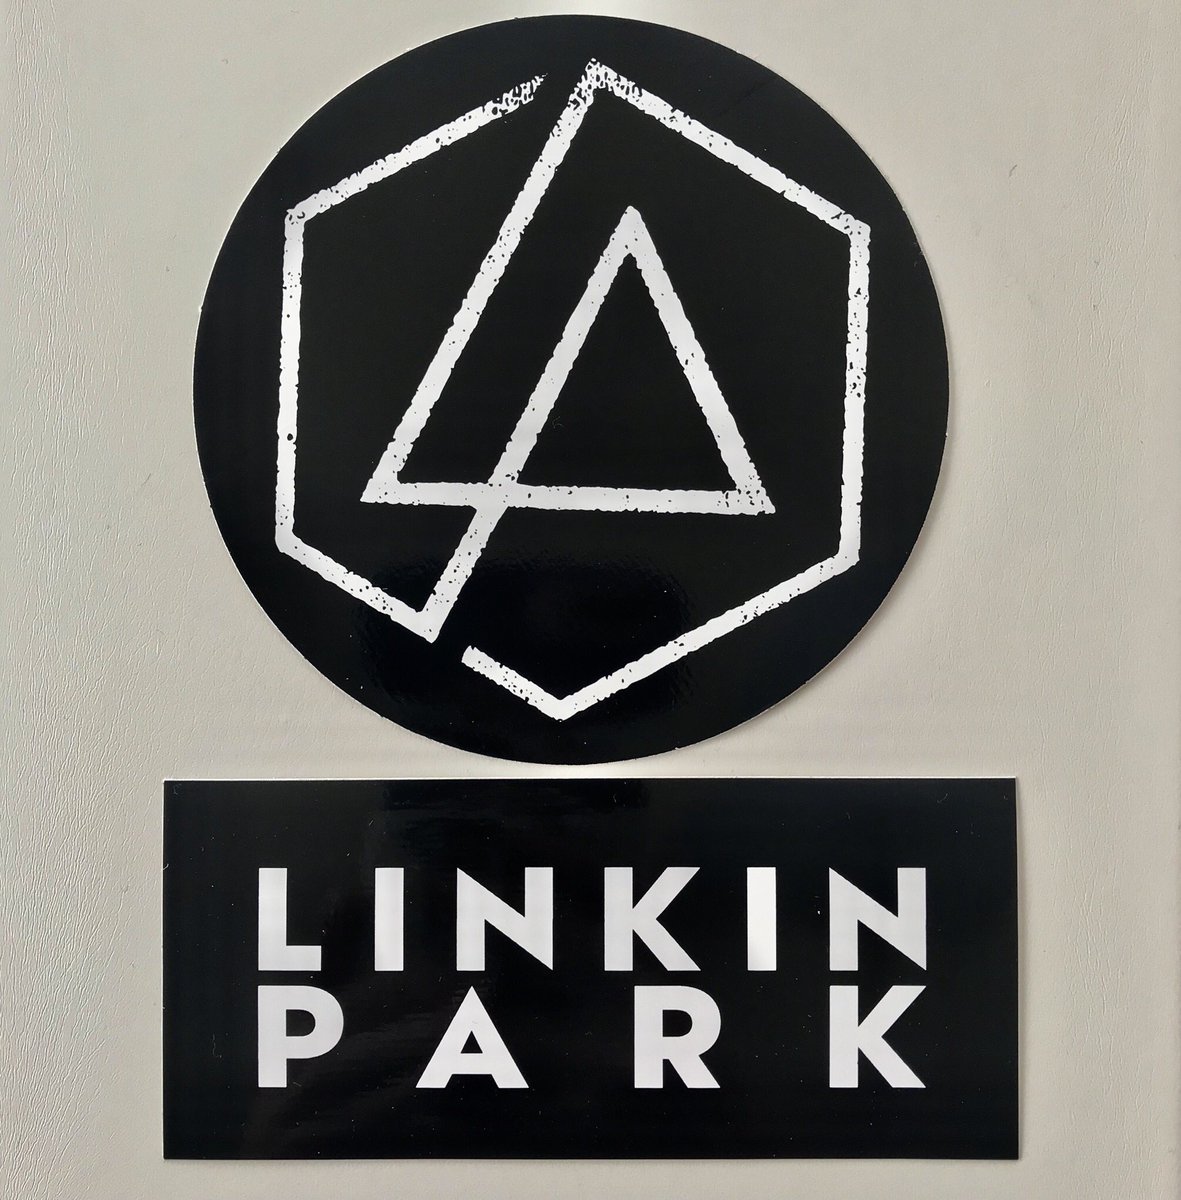 Linkin Park Japan Ar Twitter 1st Anniversary Giveaway 1周年記念プレゼント This Giveaway Is For Linkin Park Fans Who Live In Japan Linkin Parkファンの皆さんに感謝の気持ちを込めてlpu1 Hybrid Theory Ep1枚とlpロゴステッカー2種類1組をプレゼントし